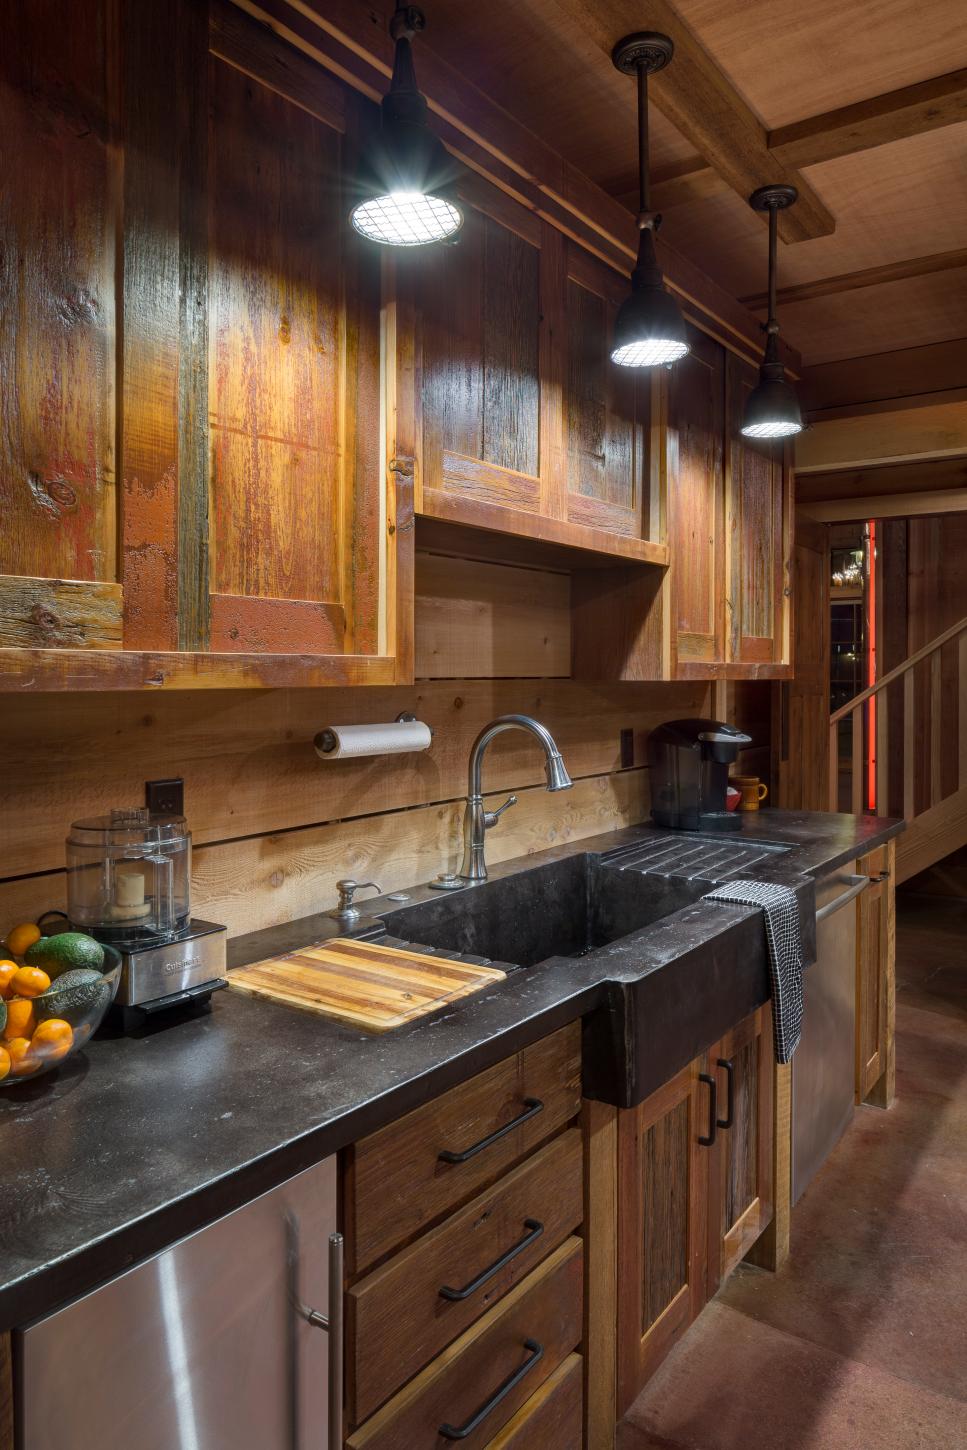 Kitchen Sink With Rustic Wood Cabinetry, Wood Cabinets With Dark Countertops